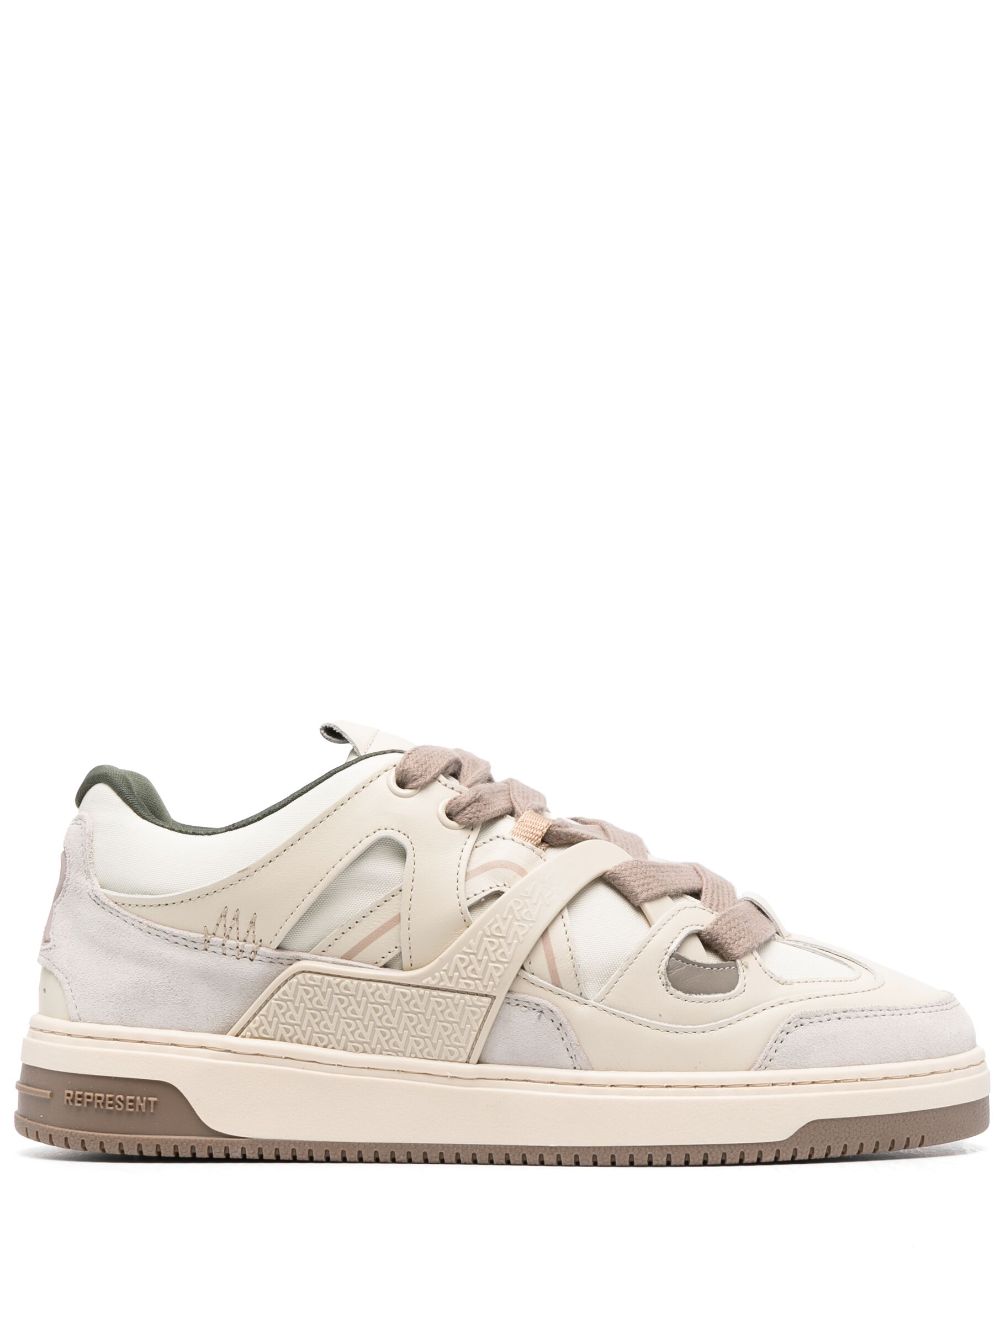 Represent Bully panelled sneakers - Neutrals von Represent